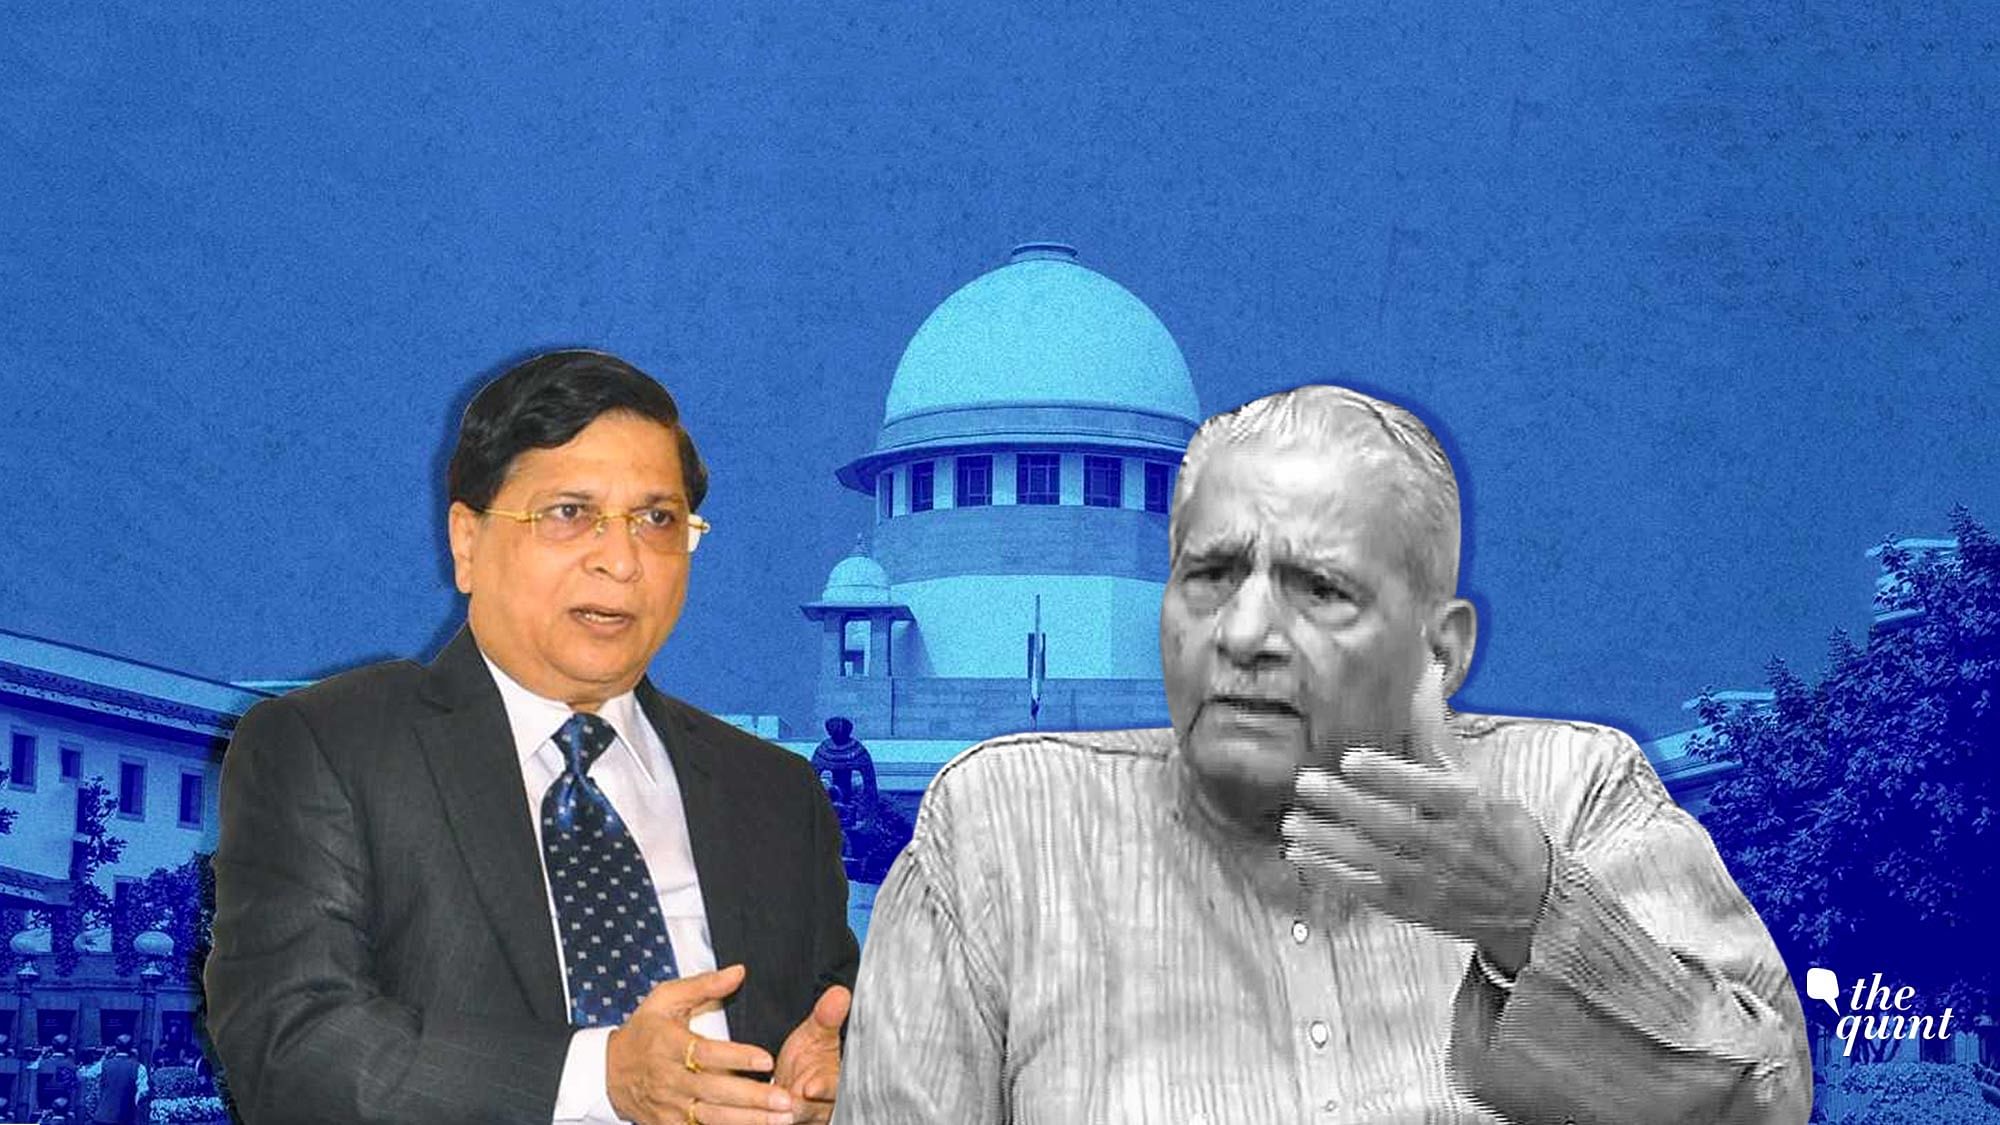 Chief Justice of India Dipak Misra and former Law Minister Shanti Bhushan (right).